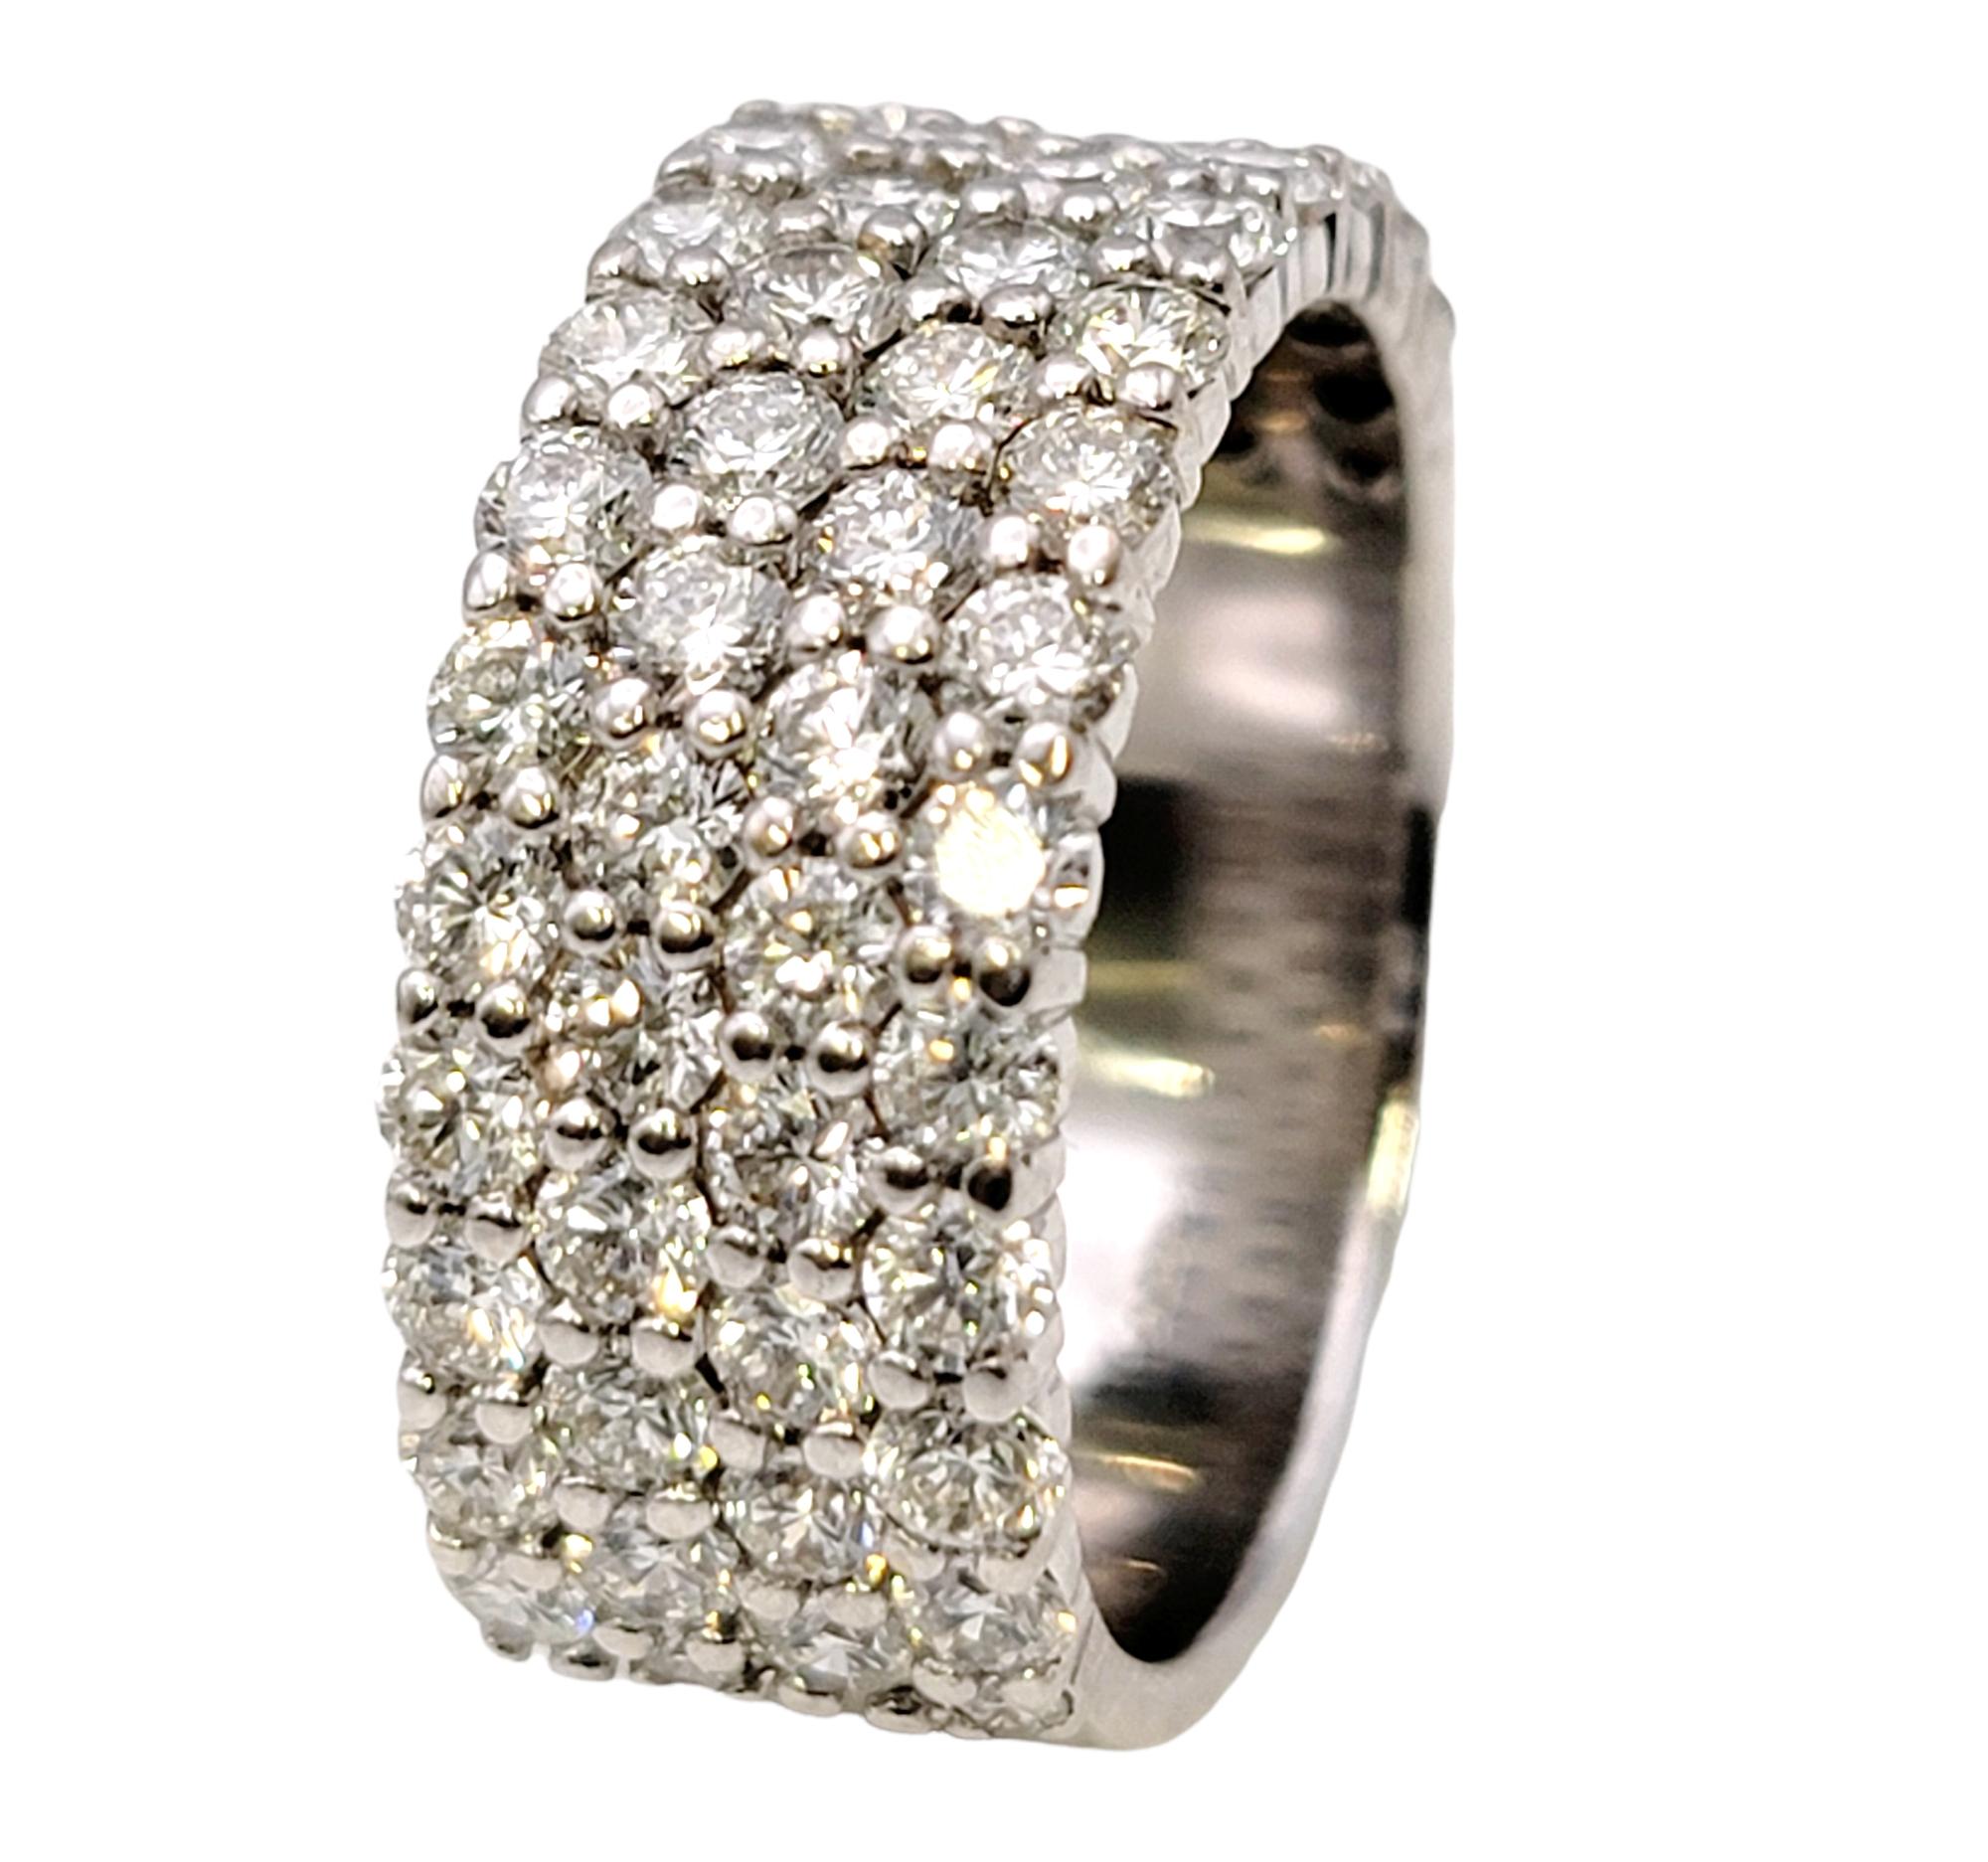 Ring size: 6.5

Stunningly sparkly diamond semi-eternity band ring. This gorgeous ring features 1.95 carats of bright, icy white pave diamonds set in 4 rows in a highly polished 18 karat white gold setting. The white gold really enhances the white